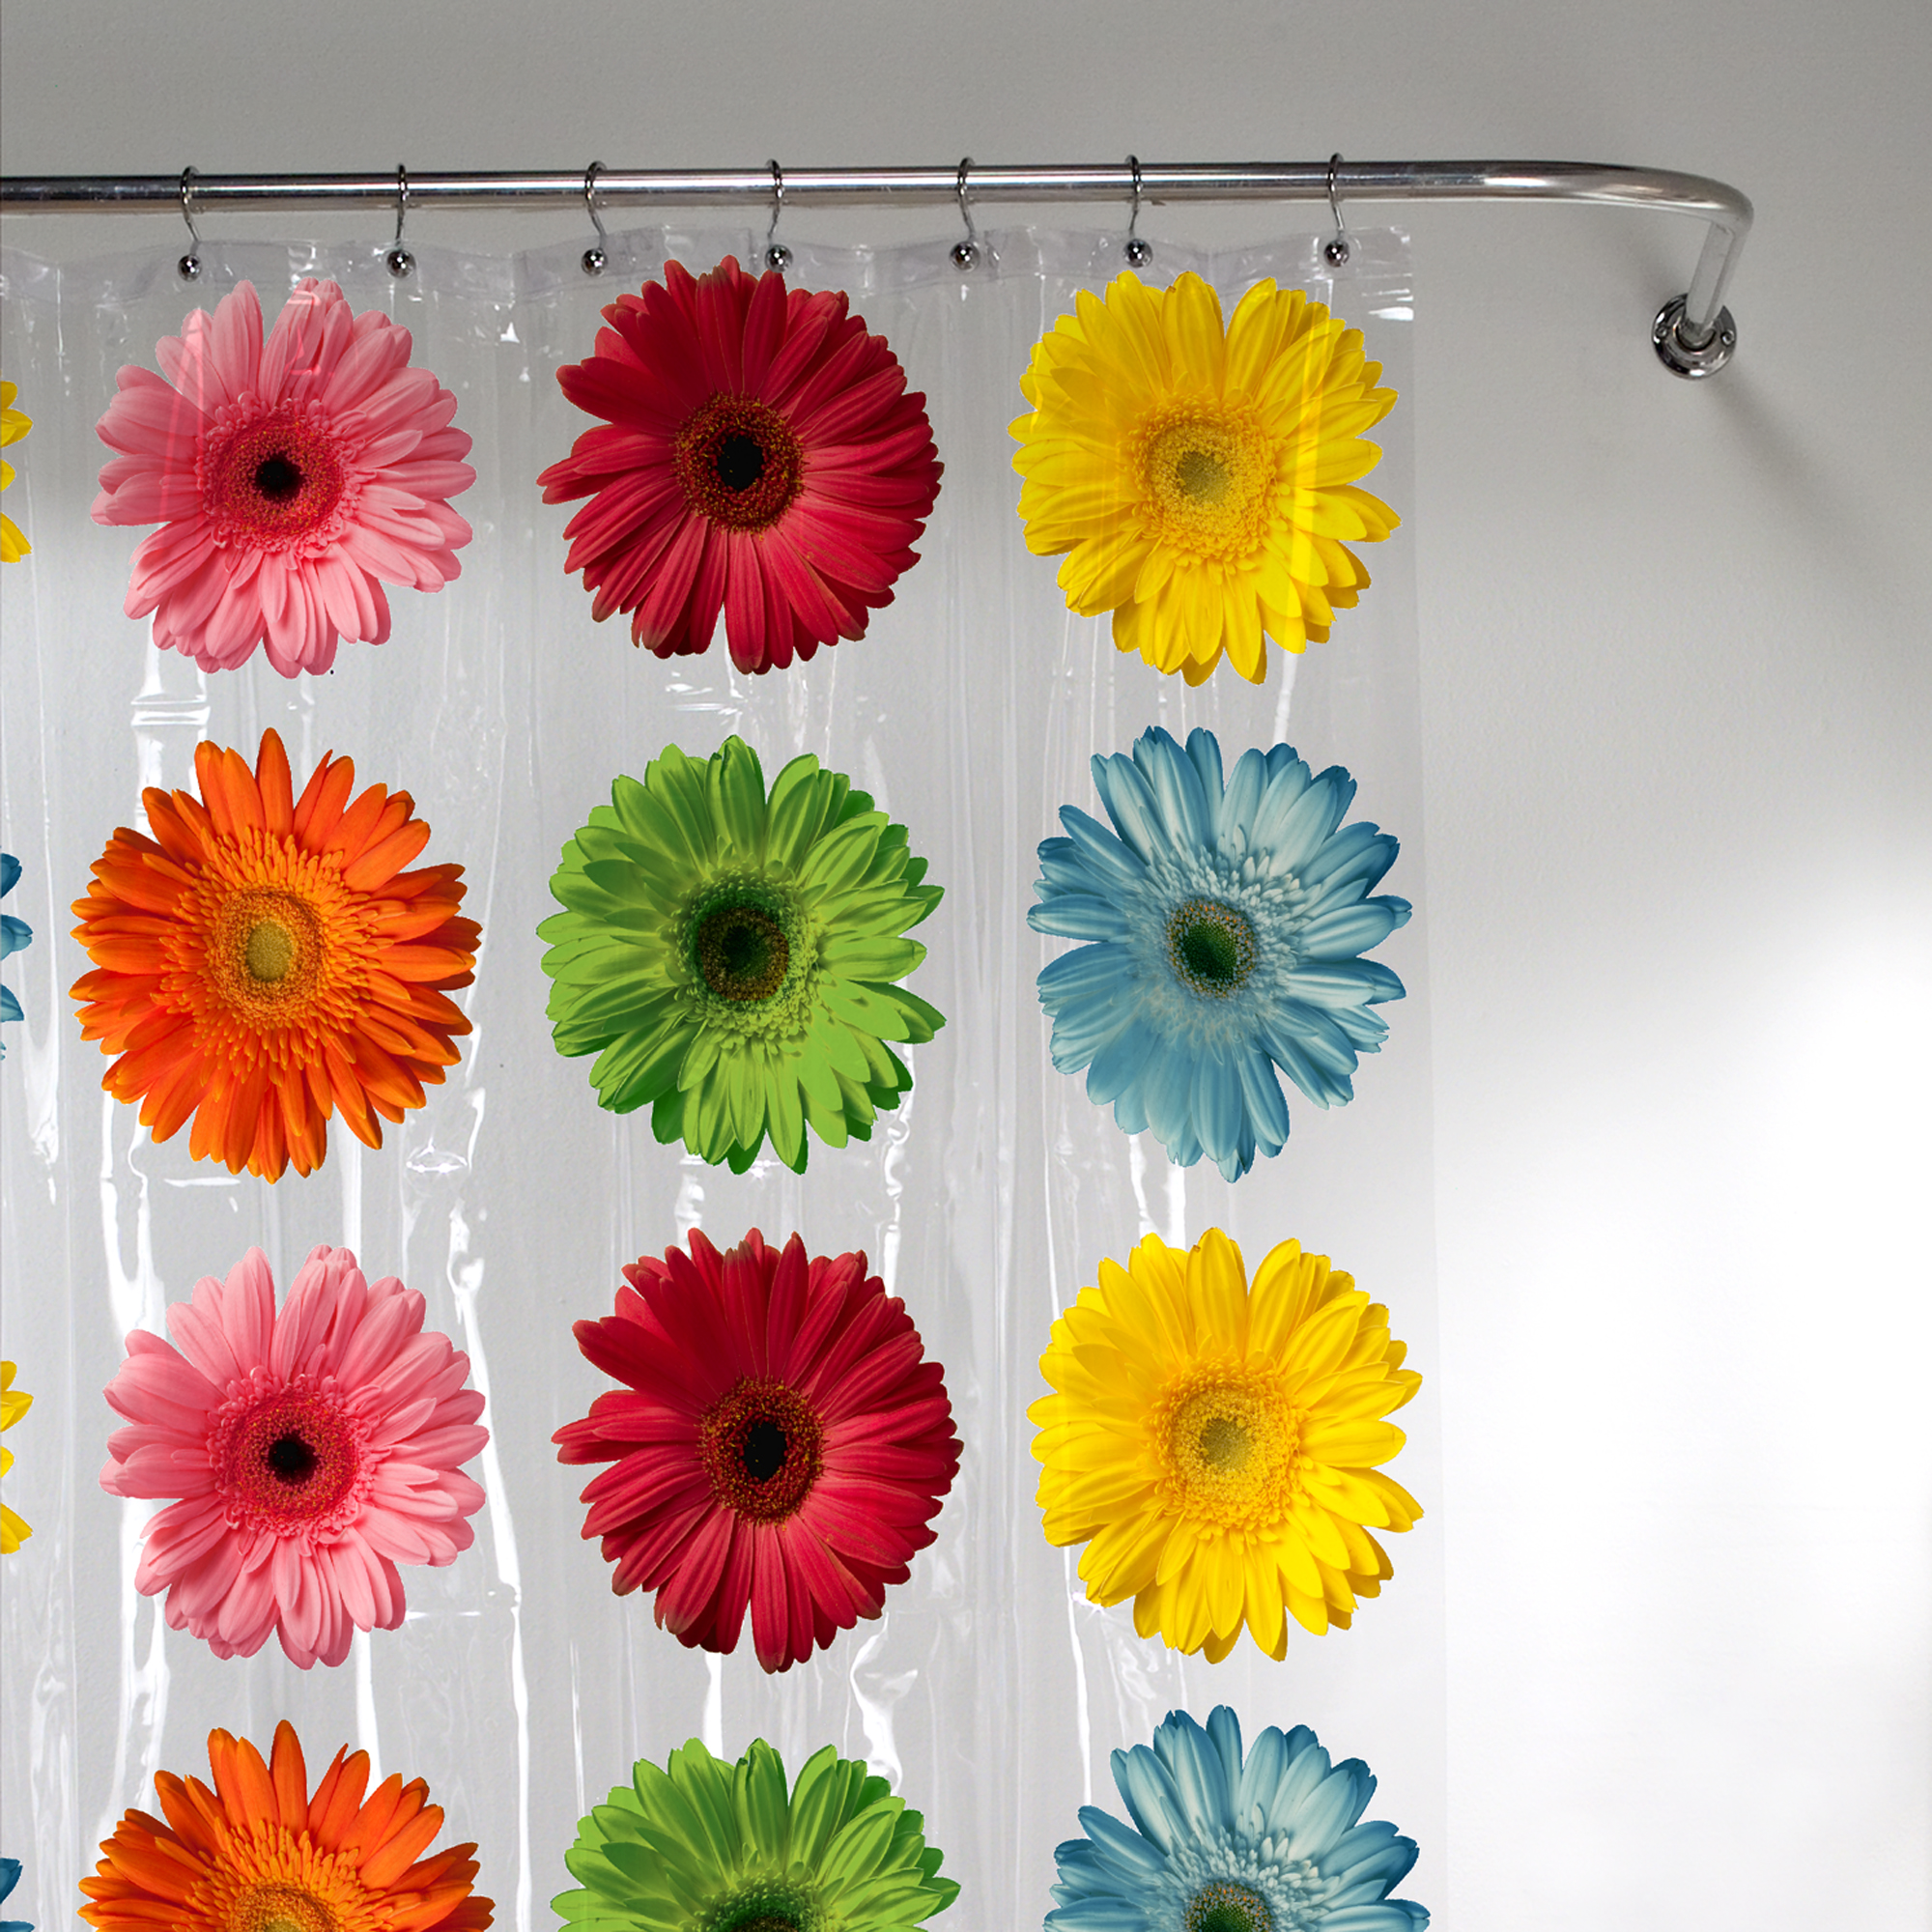 Gerber Daisy PEVA Shower Curtain, Floral - image 4 of 5